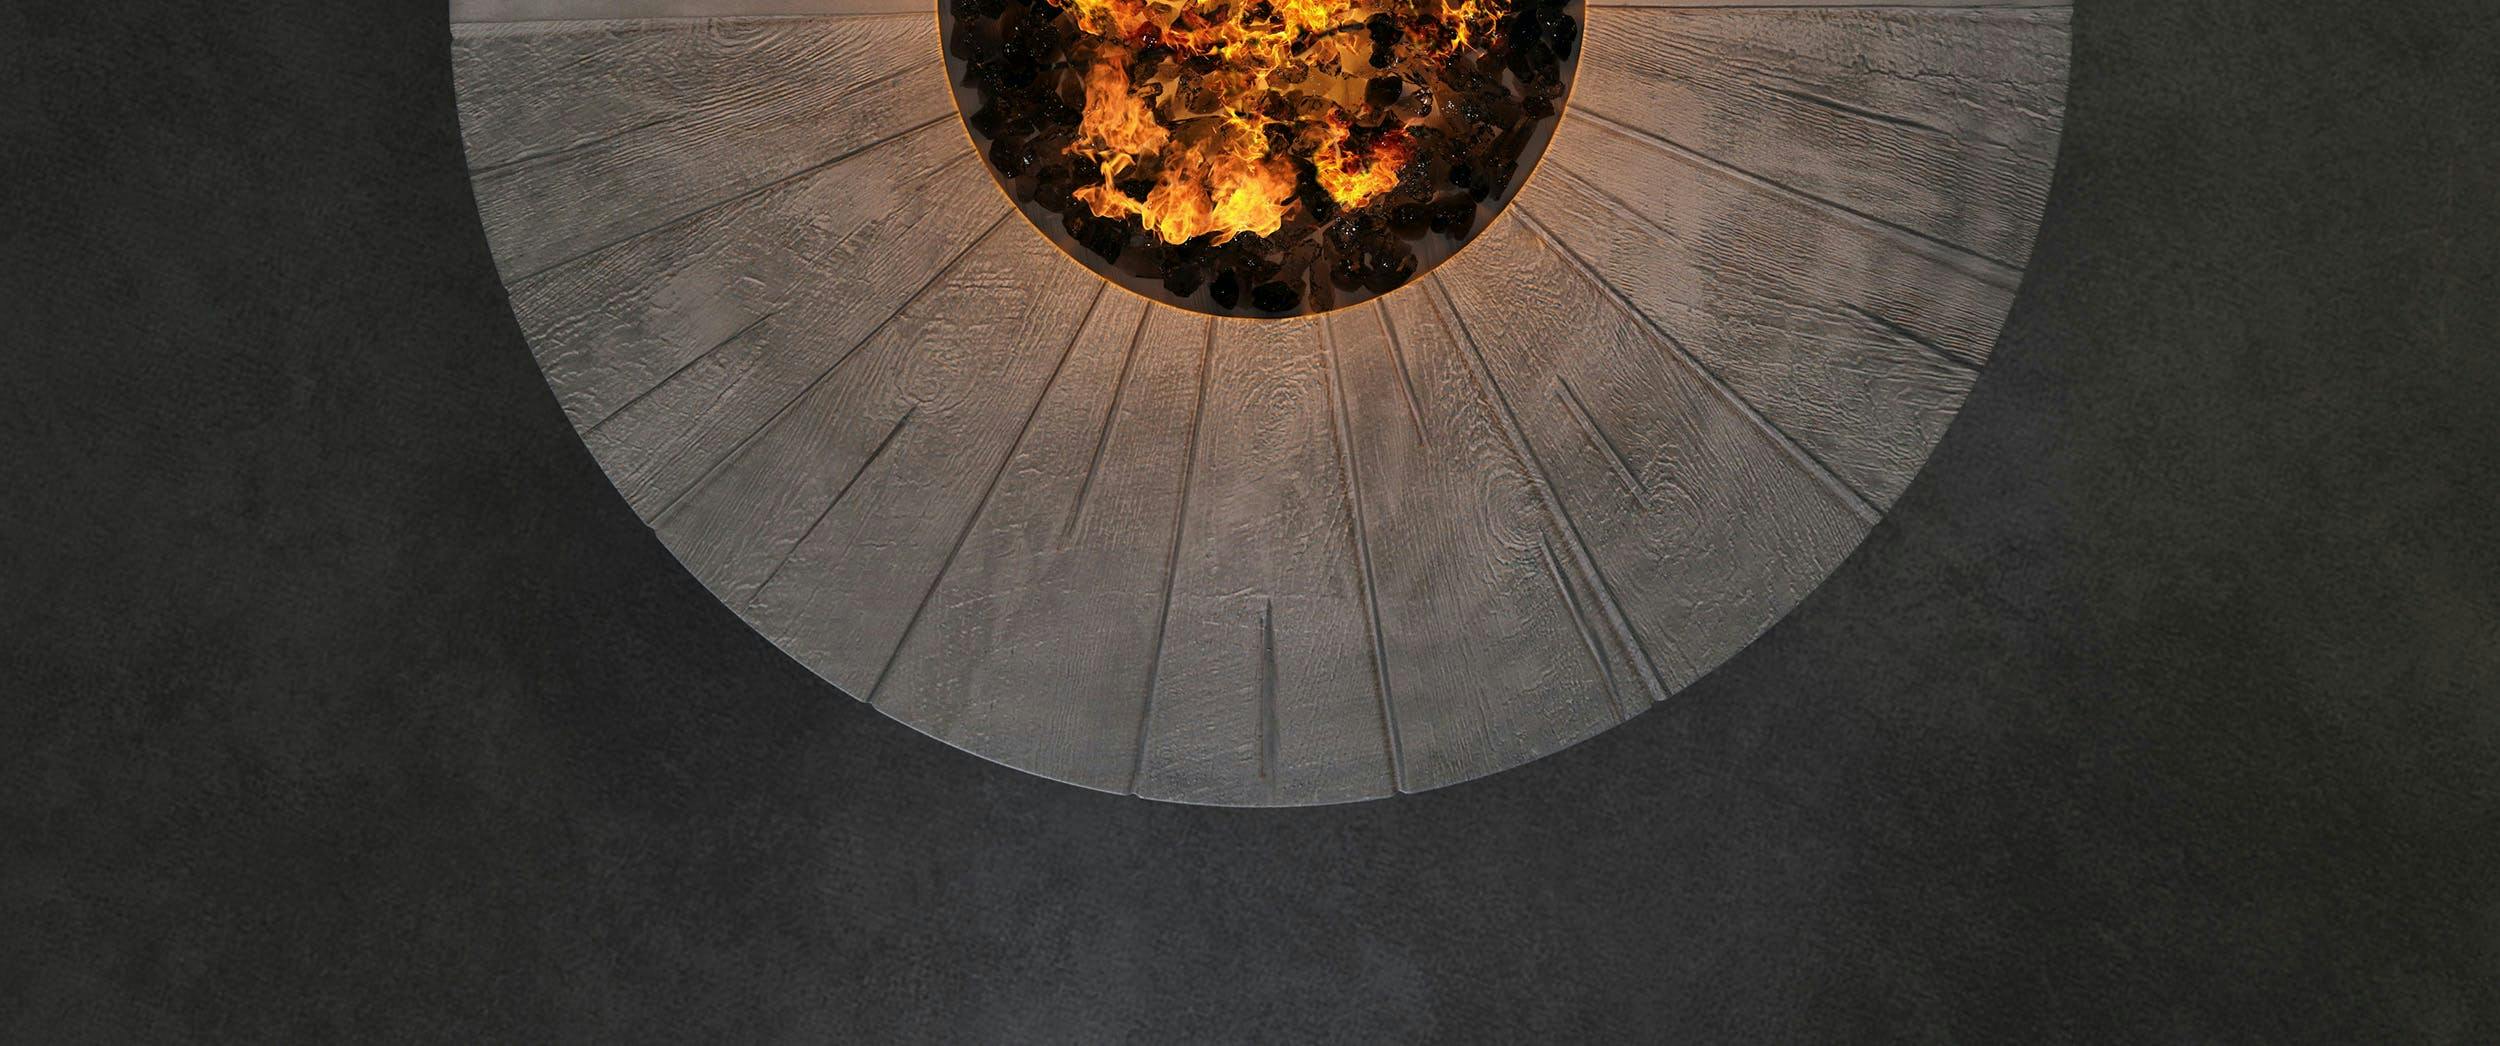 Create a state of serenity to your outdoor space with the warm glow of an outdoor fire pit. At Castelle, we pride ourselves in our attention to detail as every fire pit is individually crafted by highly skilled artisans and made in the Americas. Our goal is to provide beautiful, elegant designs that offer the highest quality materials and endless customization options.